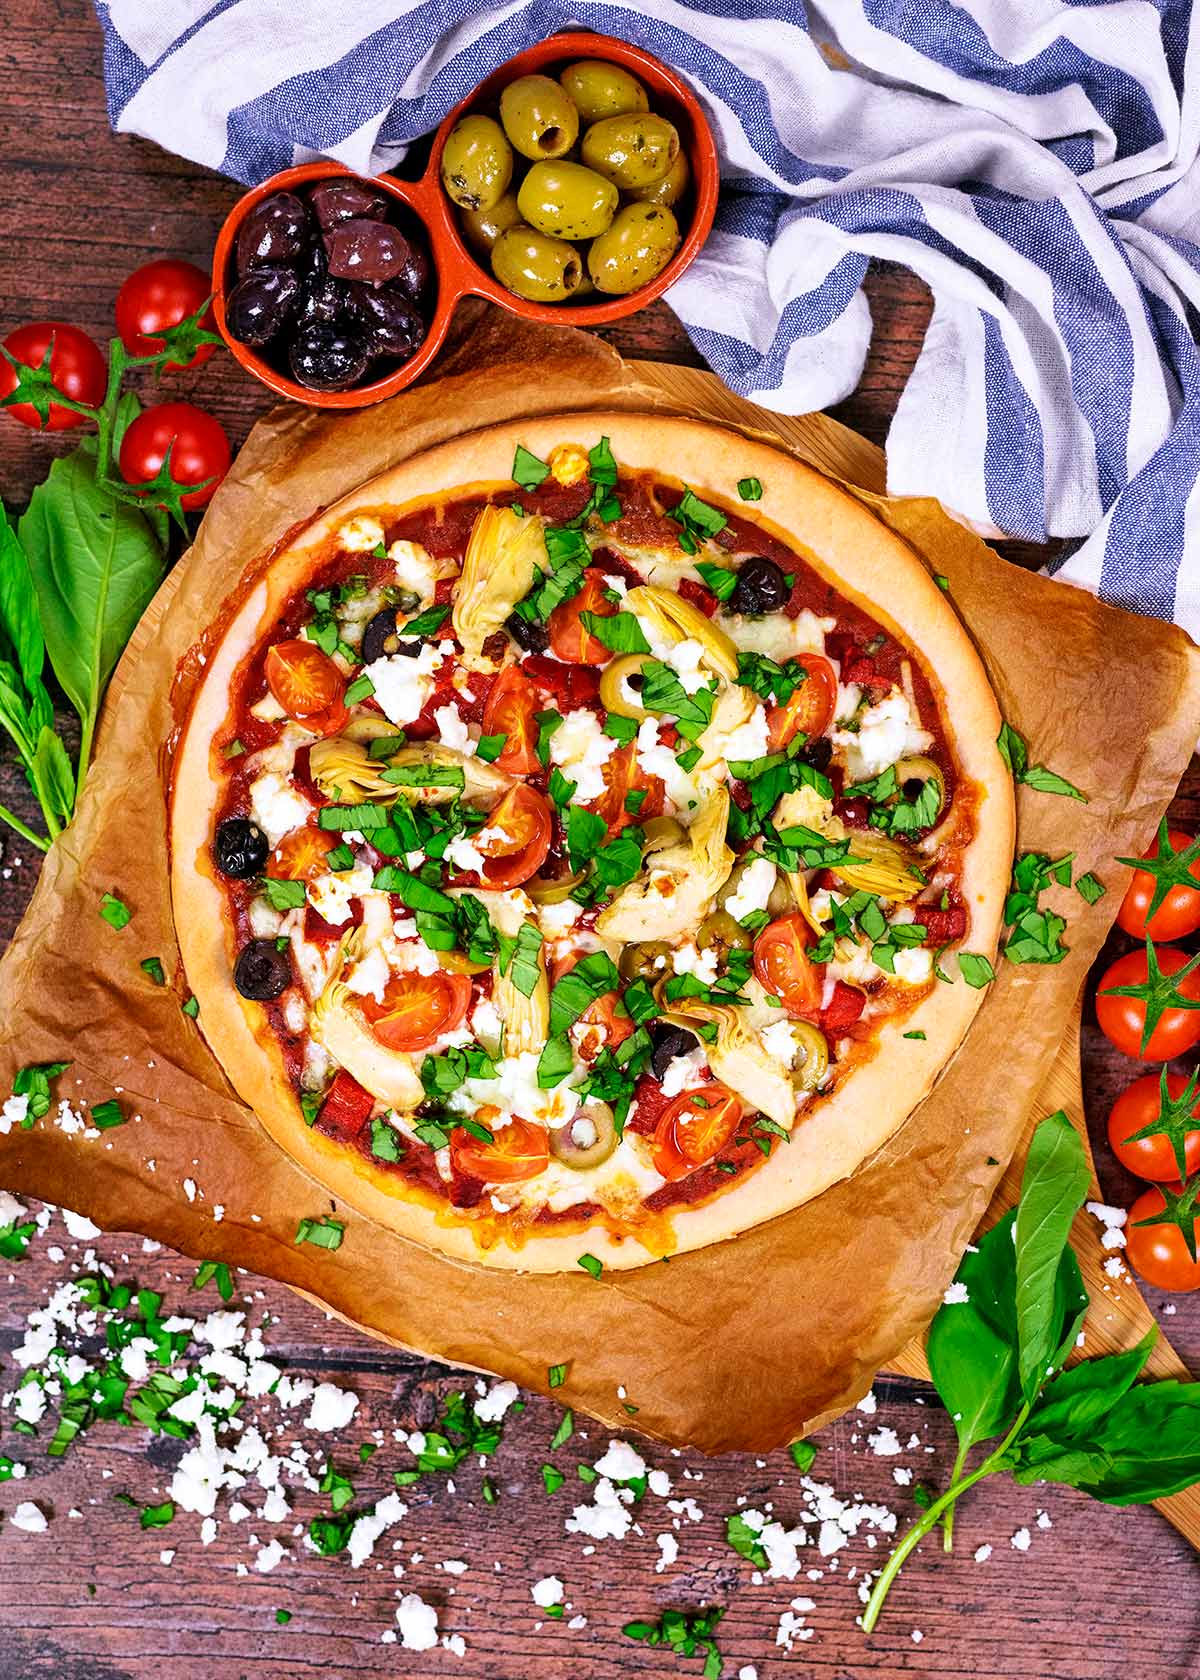 A whole pizza on a square of baking paper surrounded by olives, tomatoes and basil.